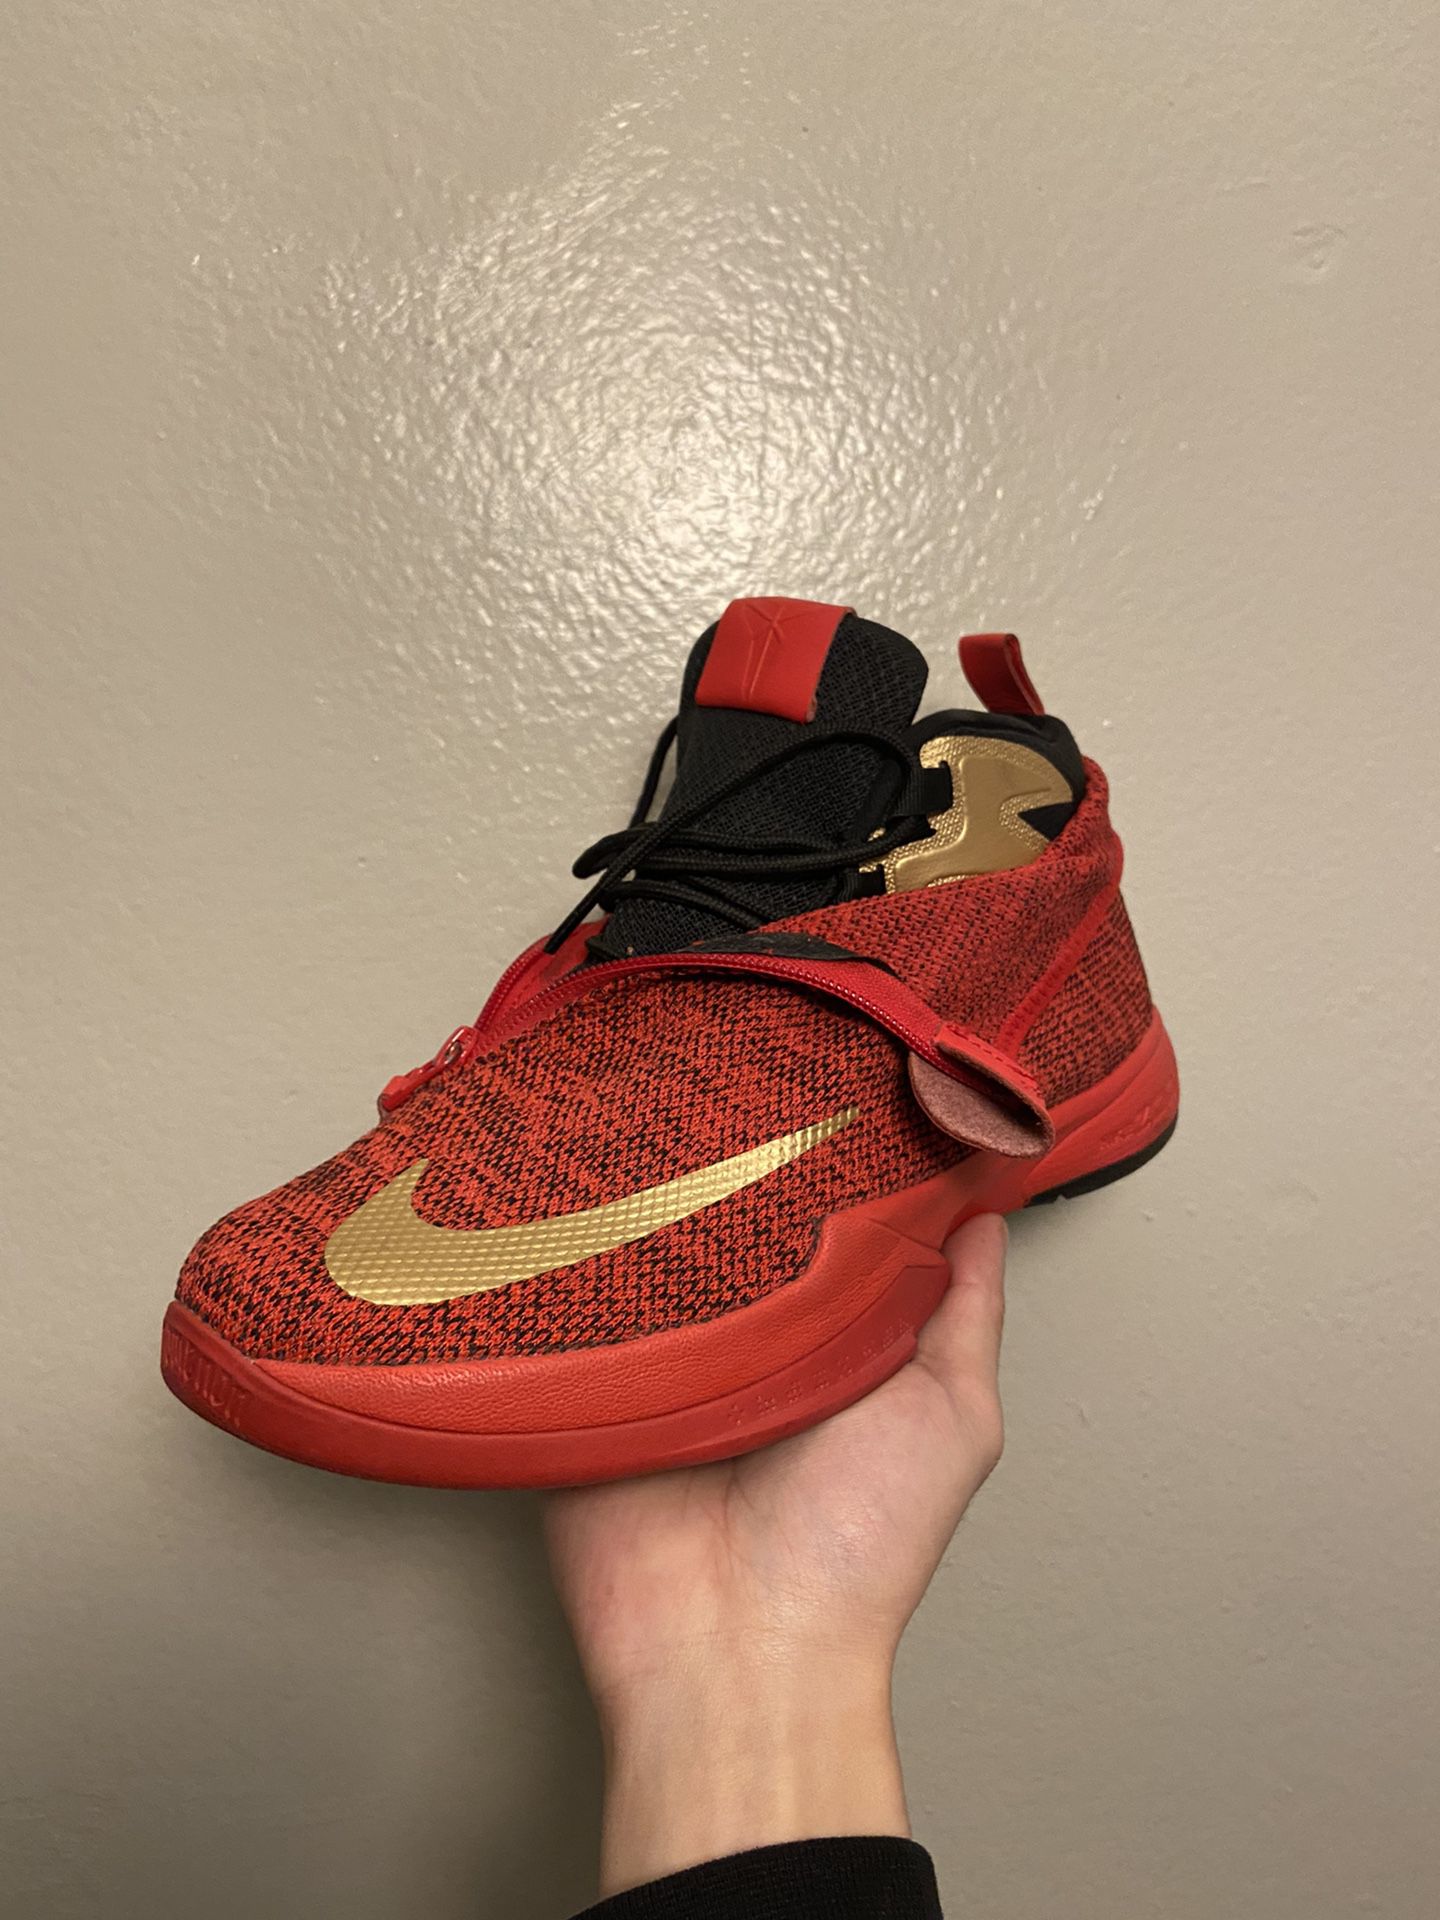 Nike Zoom Kobe Icon China for Sale in Las Vegas, NV OfferUp